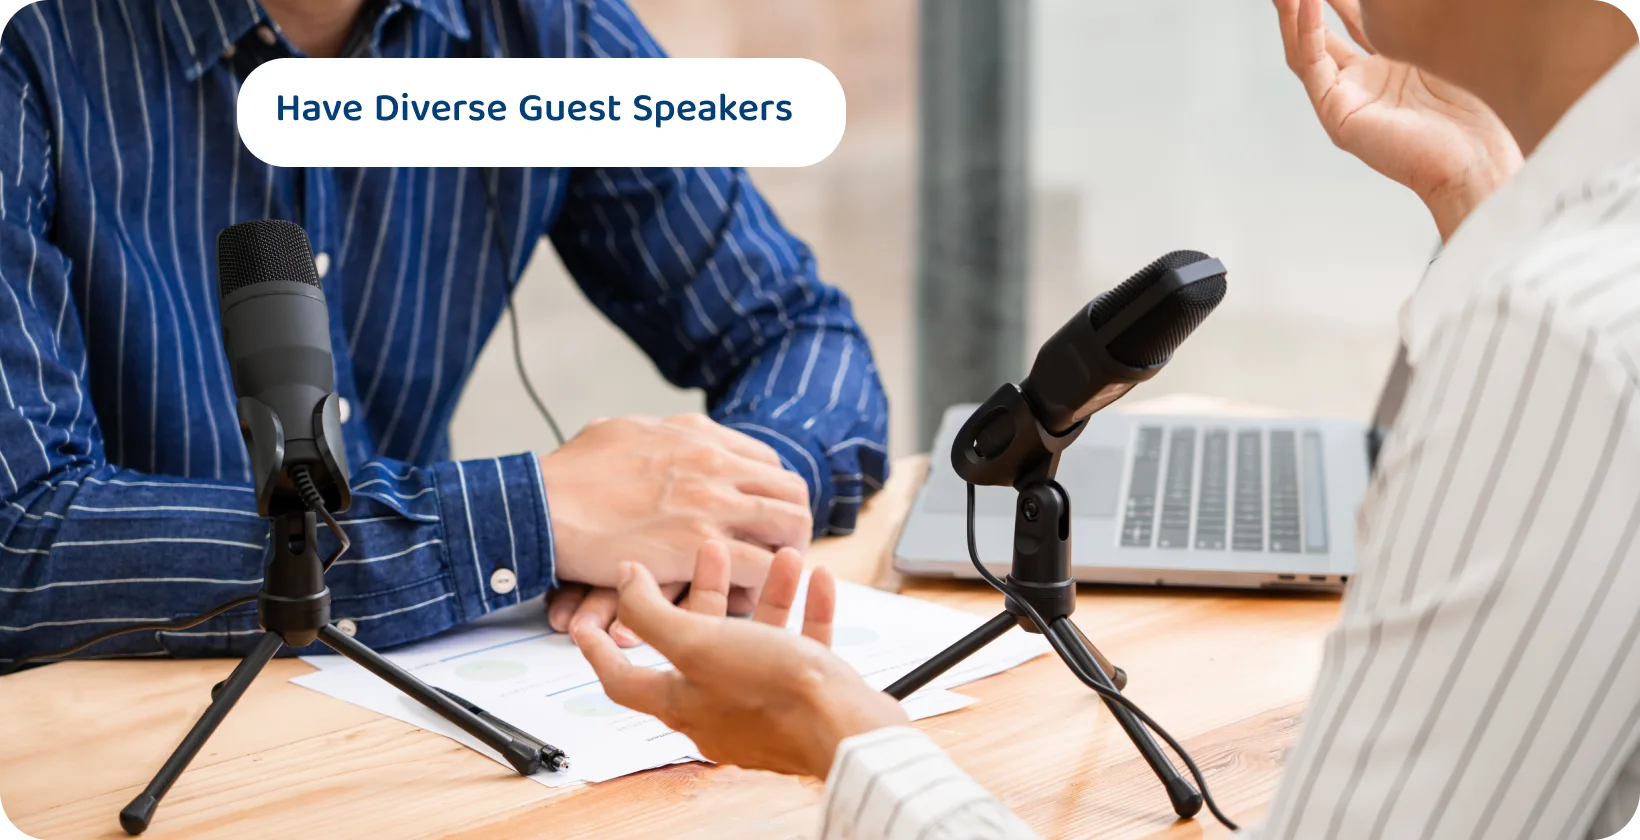 Two podcasters with microphones discussing may be the content tips for engaging and diverse guest speaker sessions.